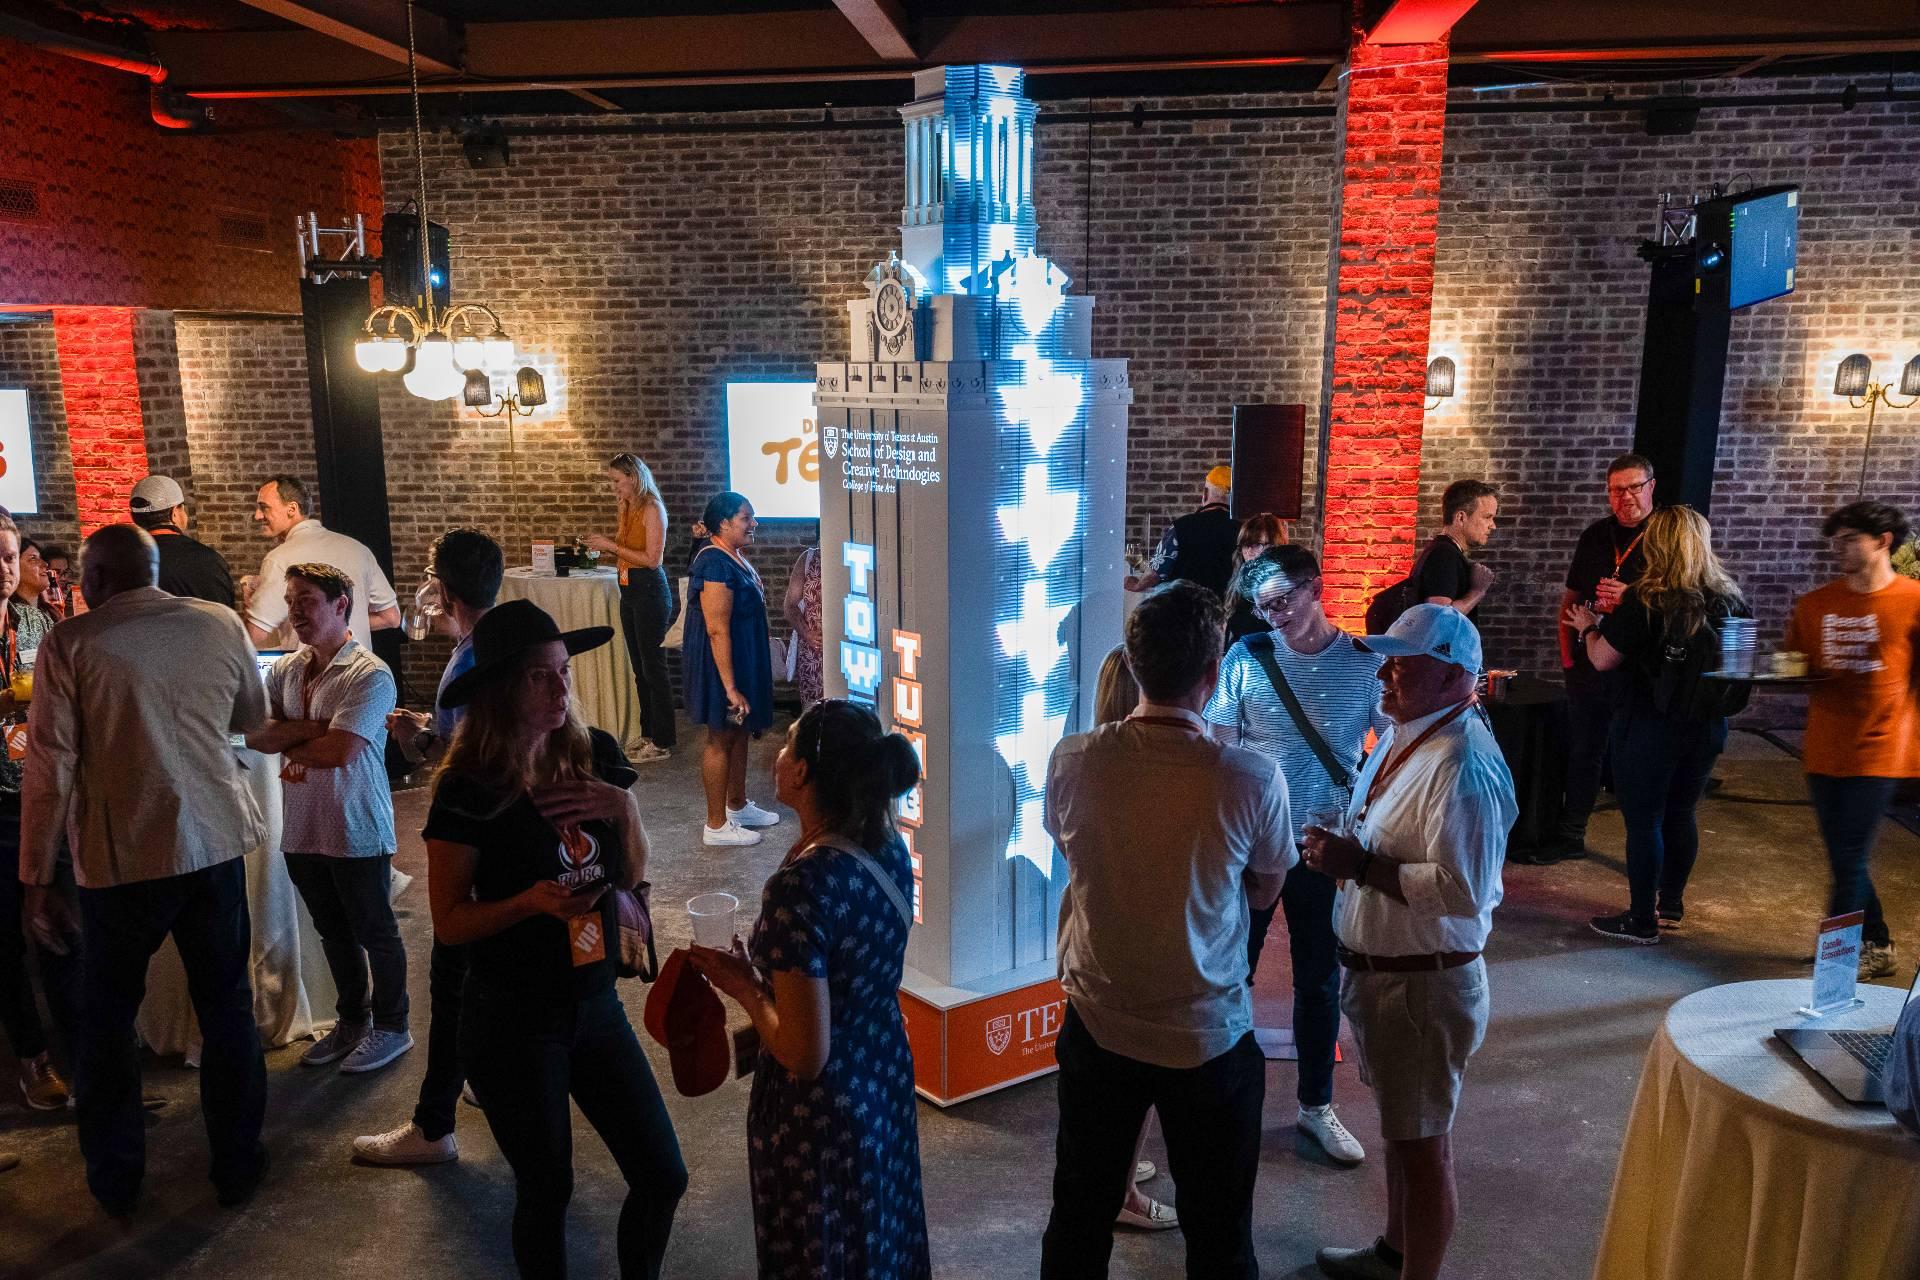 Imagery is projected on a 3D model of the UT Tower at a SXSW event